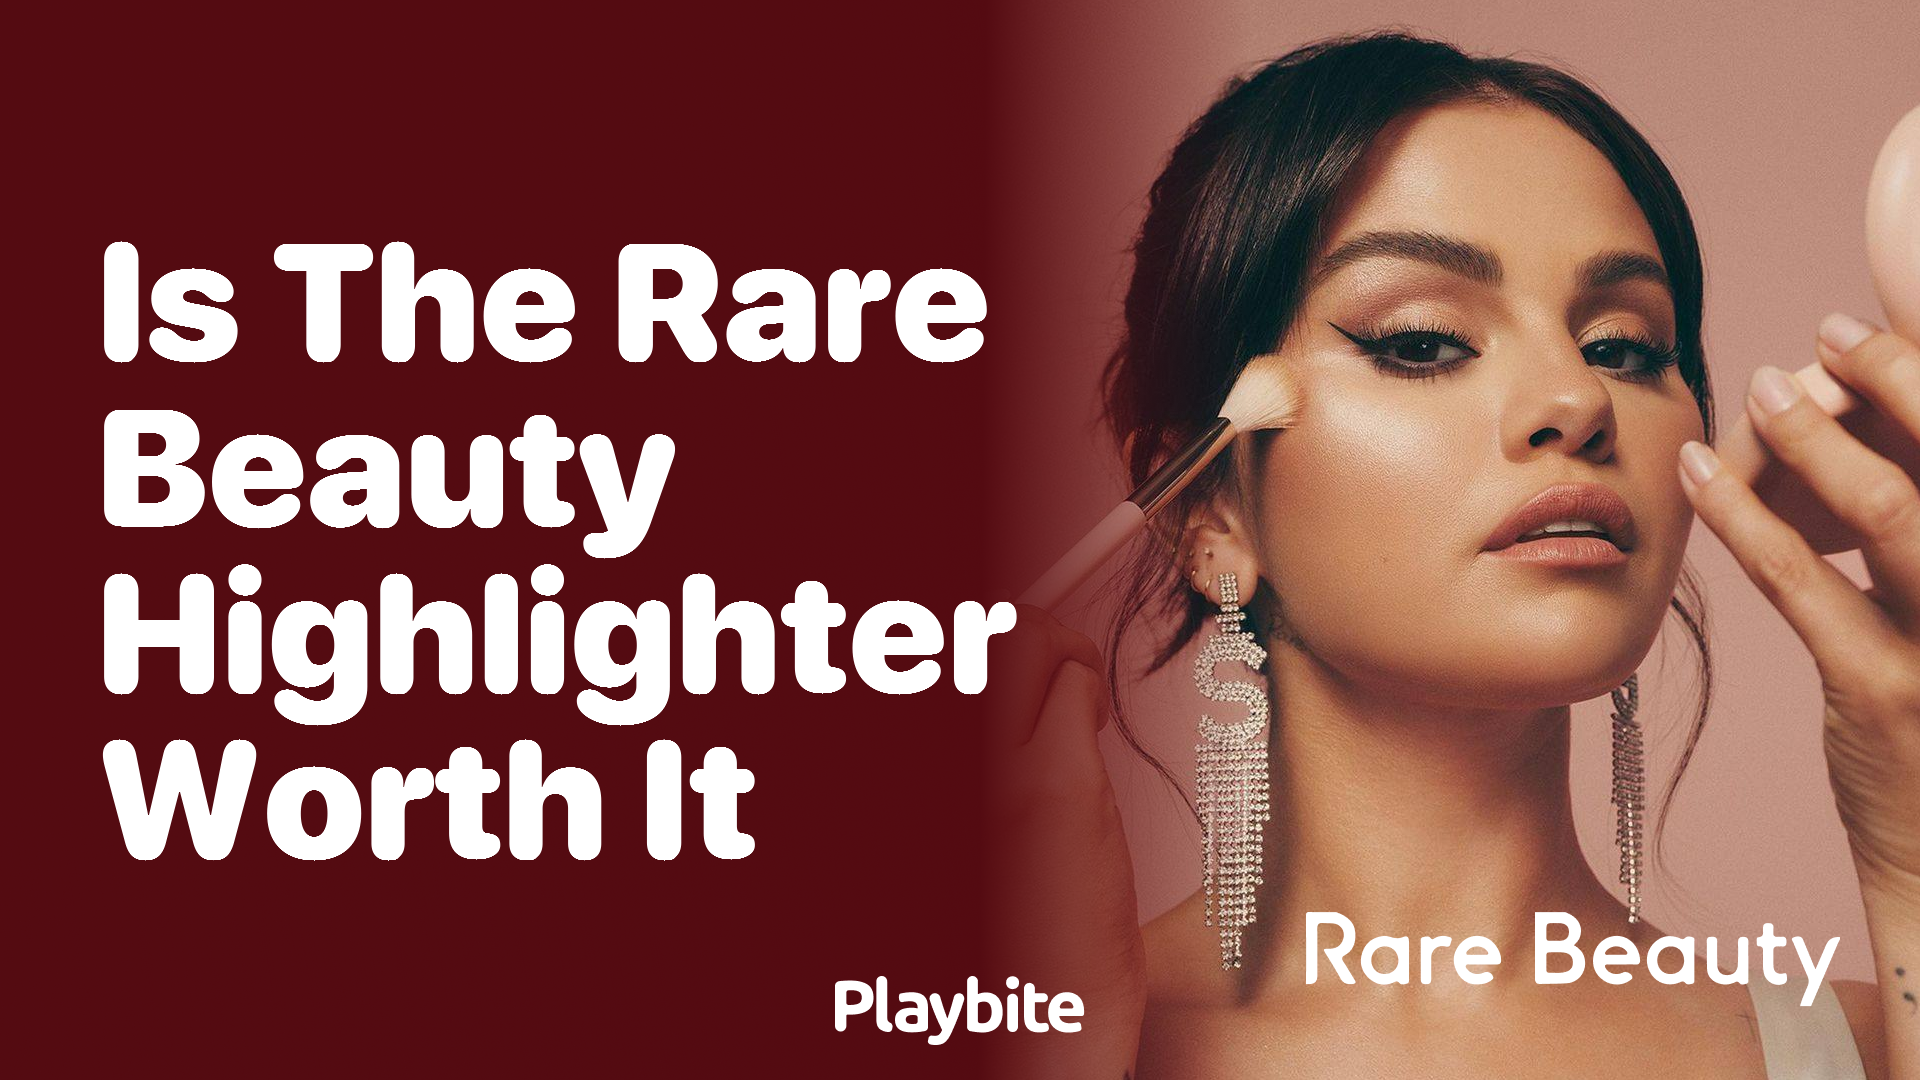 Is the Rare Beauty Highlighter Worth It? Find Out Here!